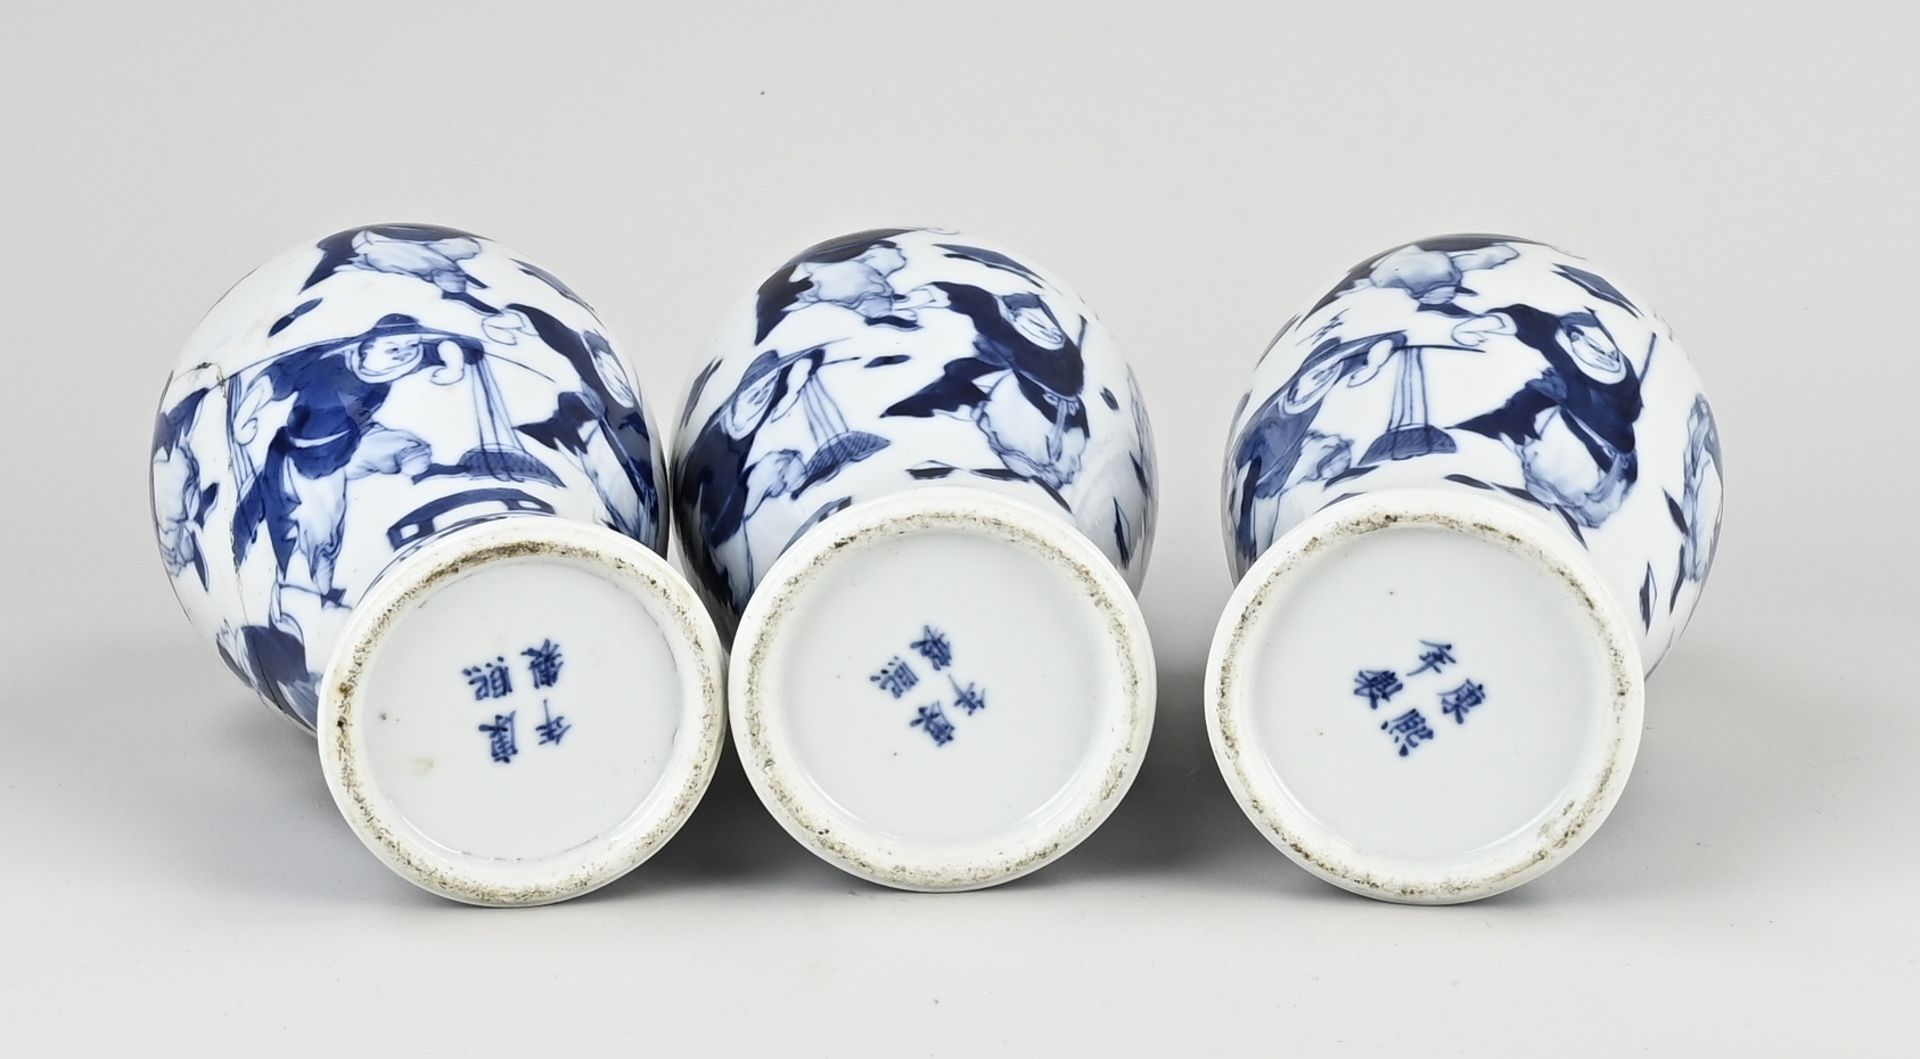 Three 18th - 19th century Chinese lidded vases, H 23 cm. - Image 3 of 3